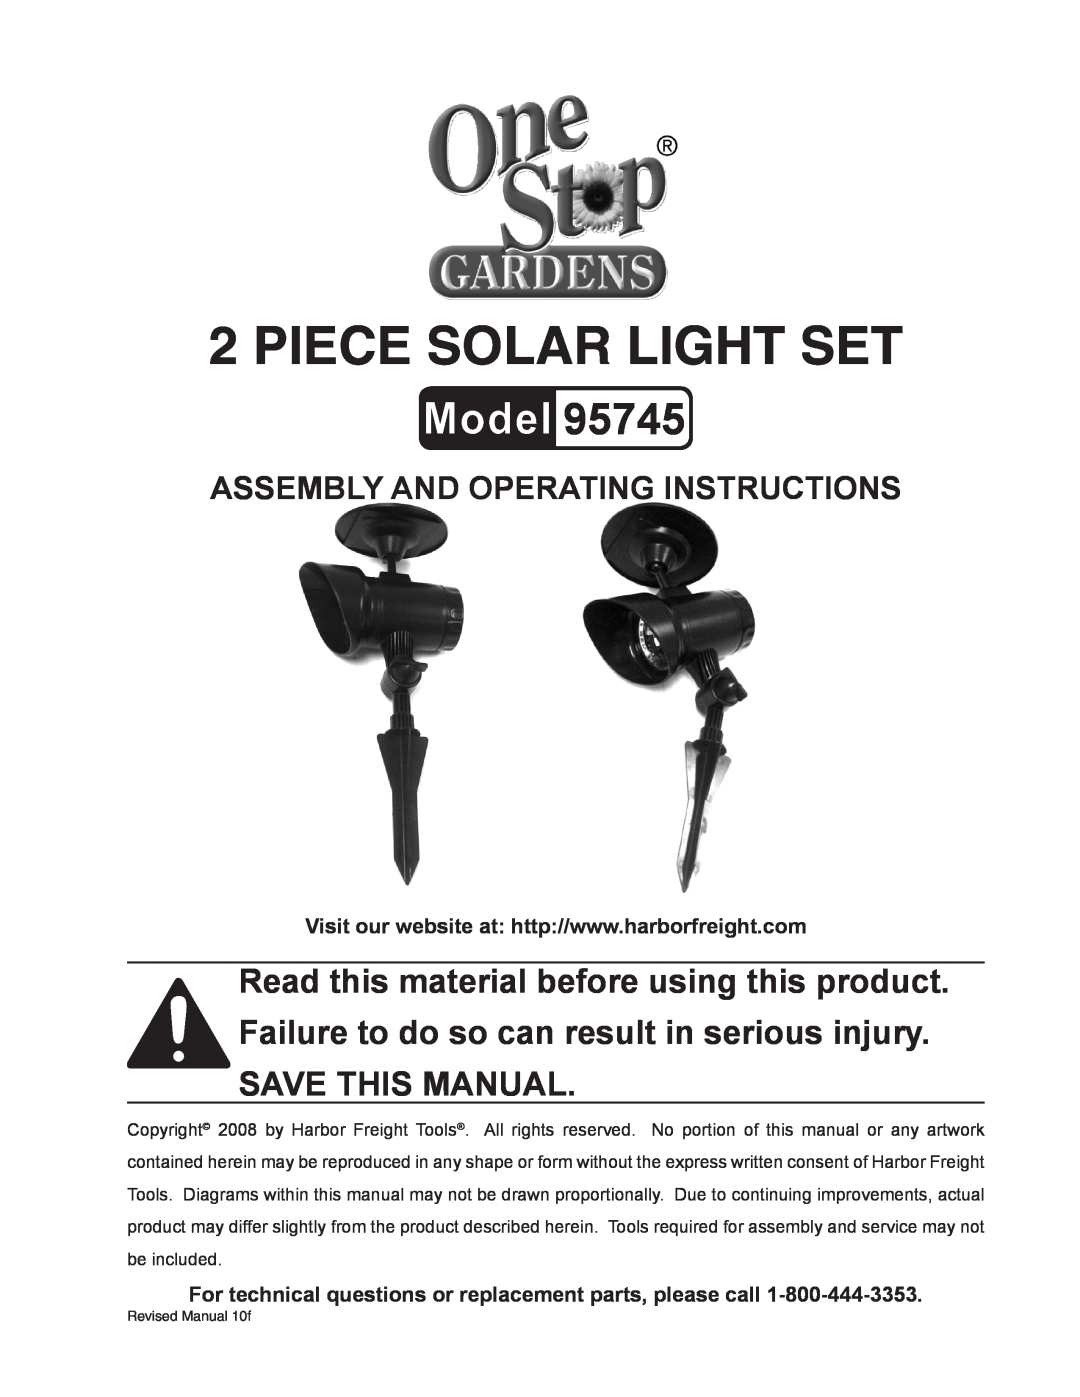 Harbor Freight Tools 95745 manual Piece Solar Light Set, assembly and Operating Instructions 